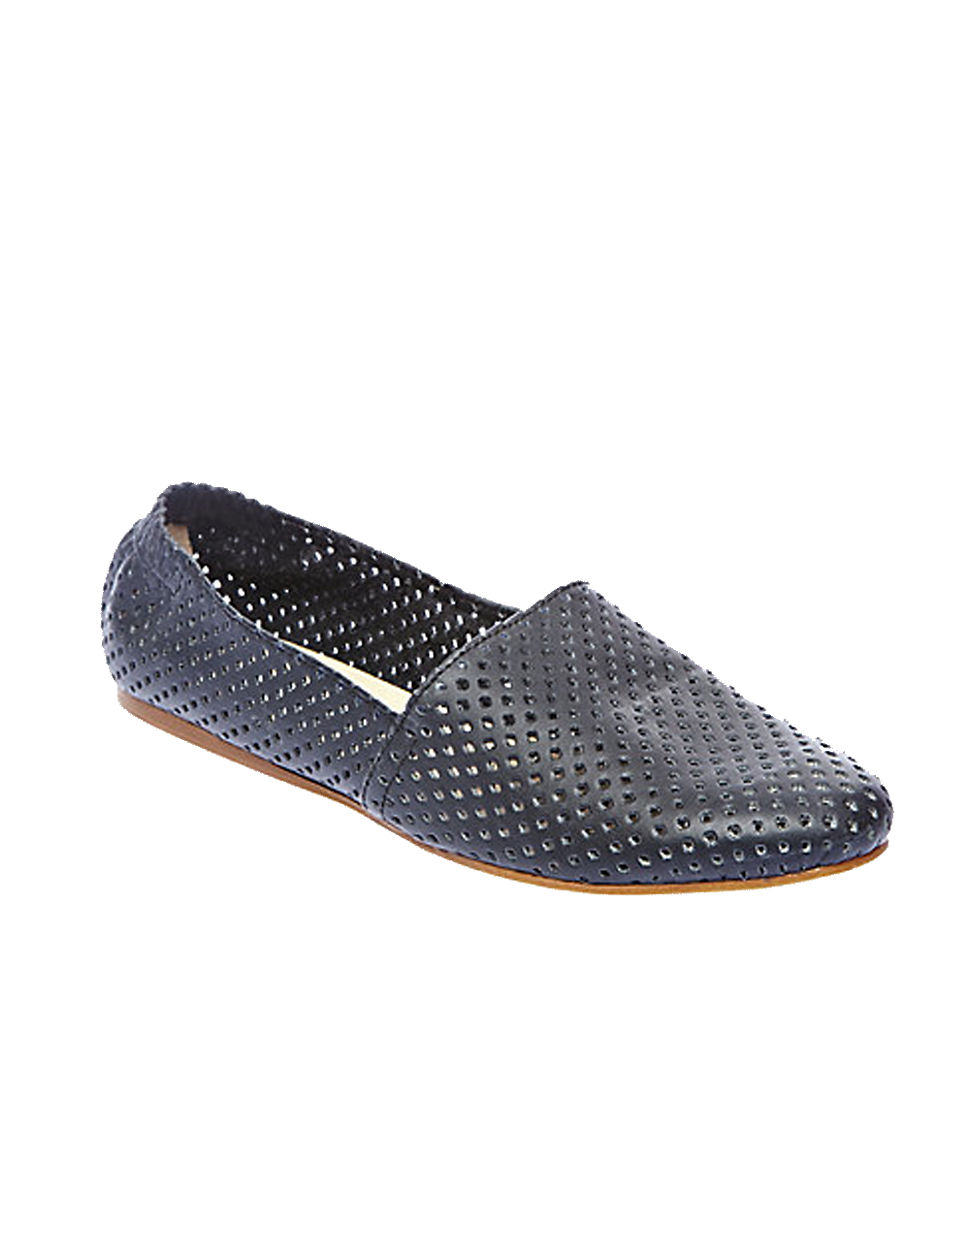 Steve Madden Sweet Perforated Leather Flats in Black | Lyst